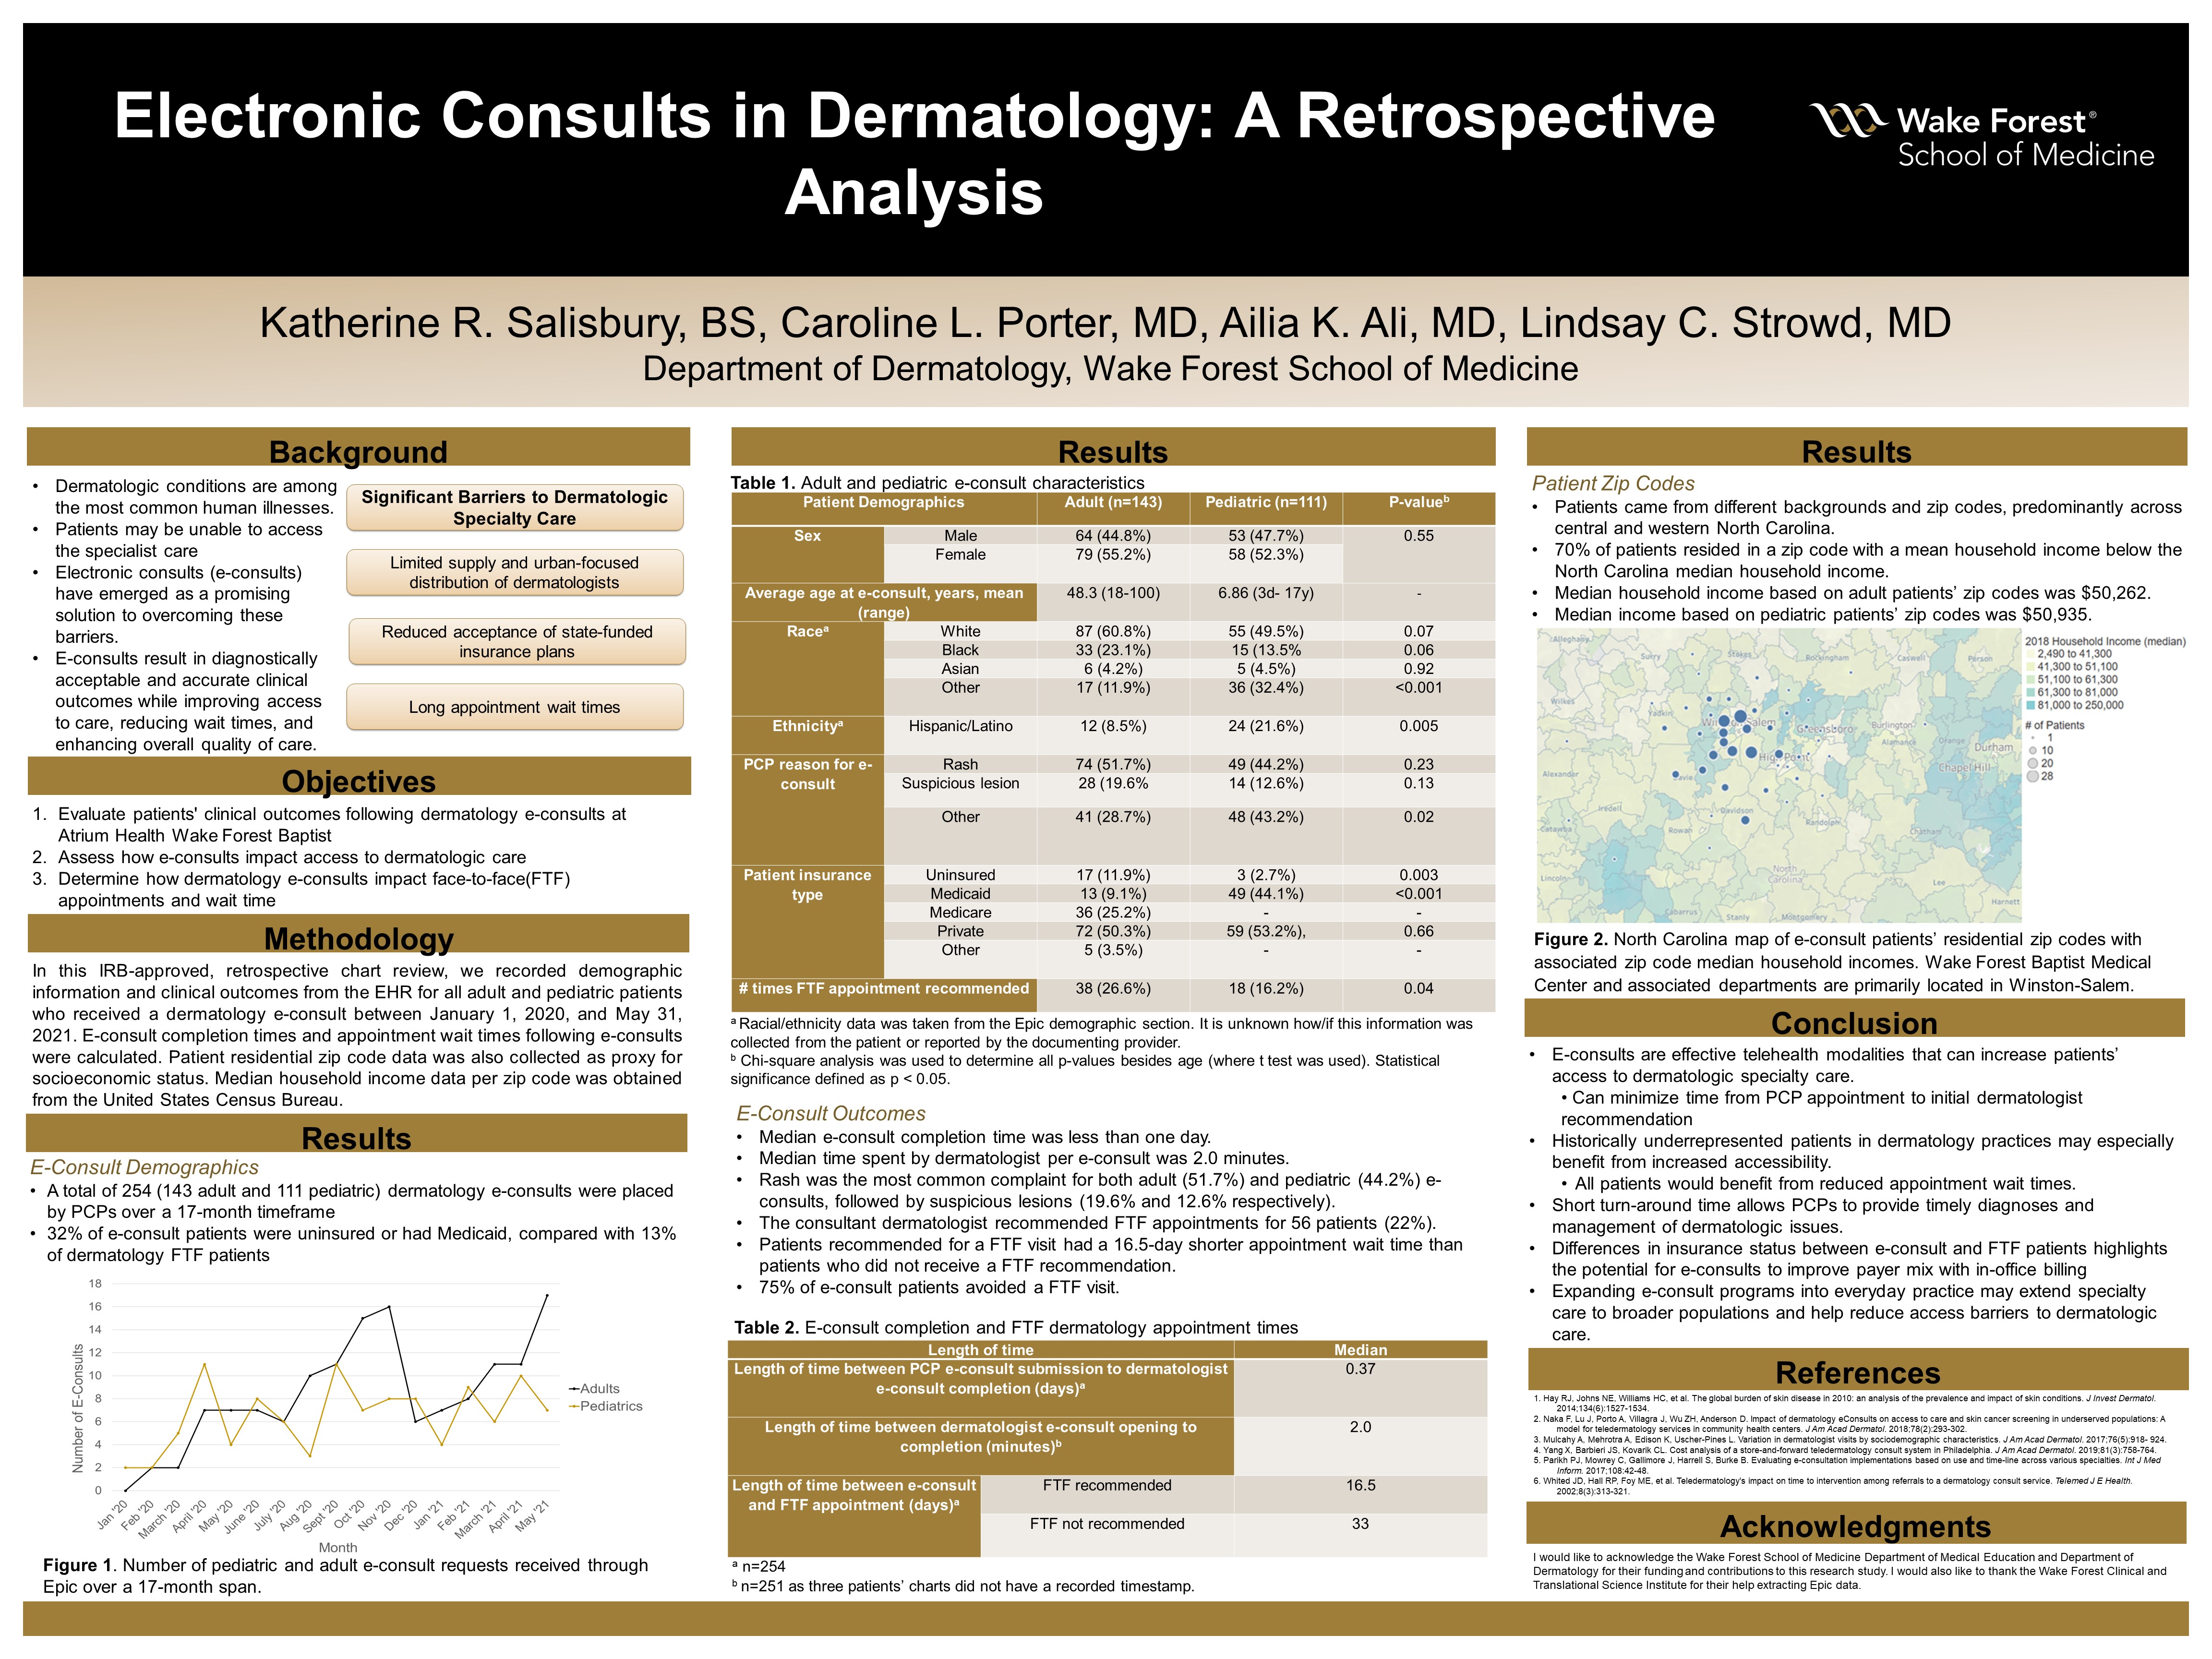 Showcase Image for Electronic Consults in Dermatology: A Retrospective Analysis 